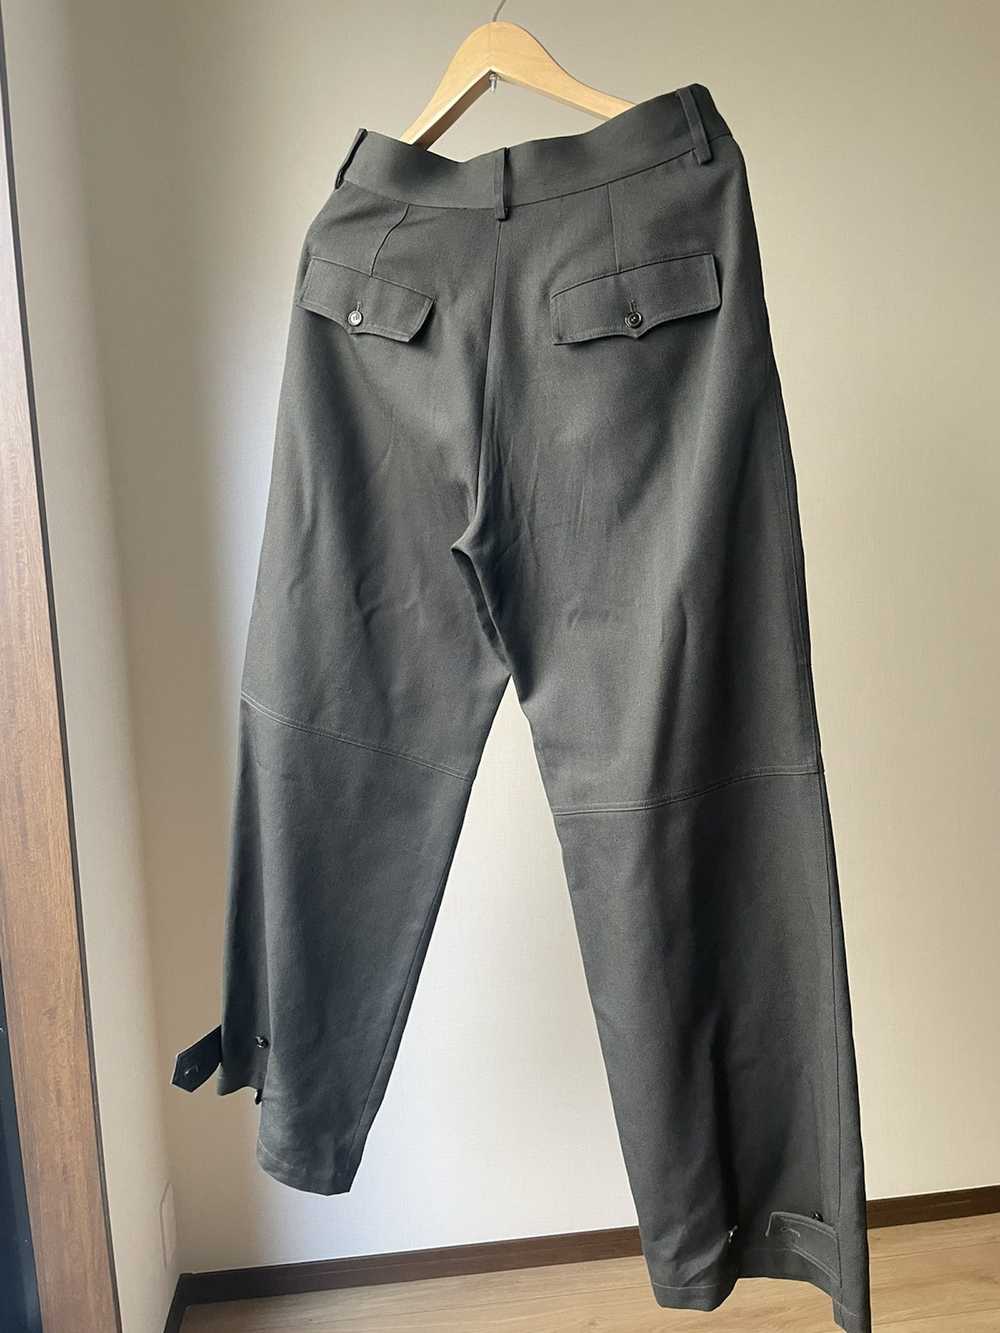 Japanese Brand Les Six Wool Trousers - image 2